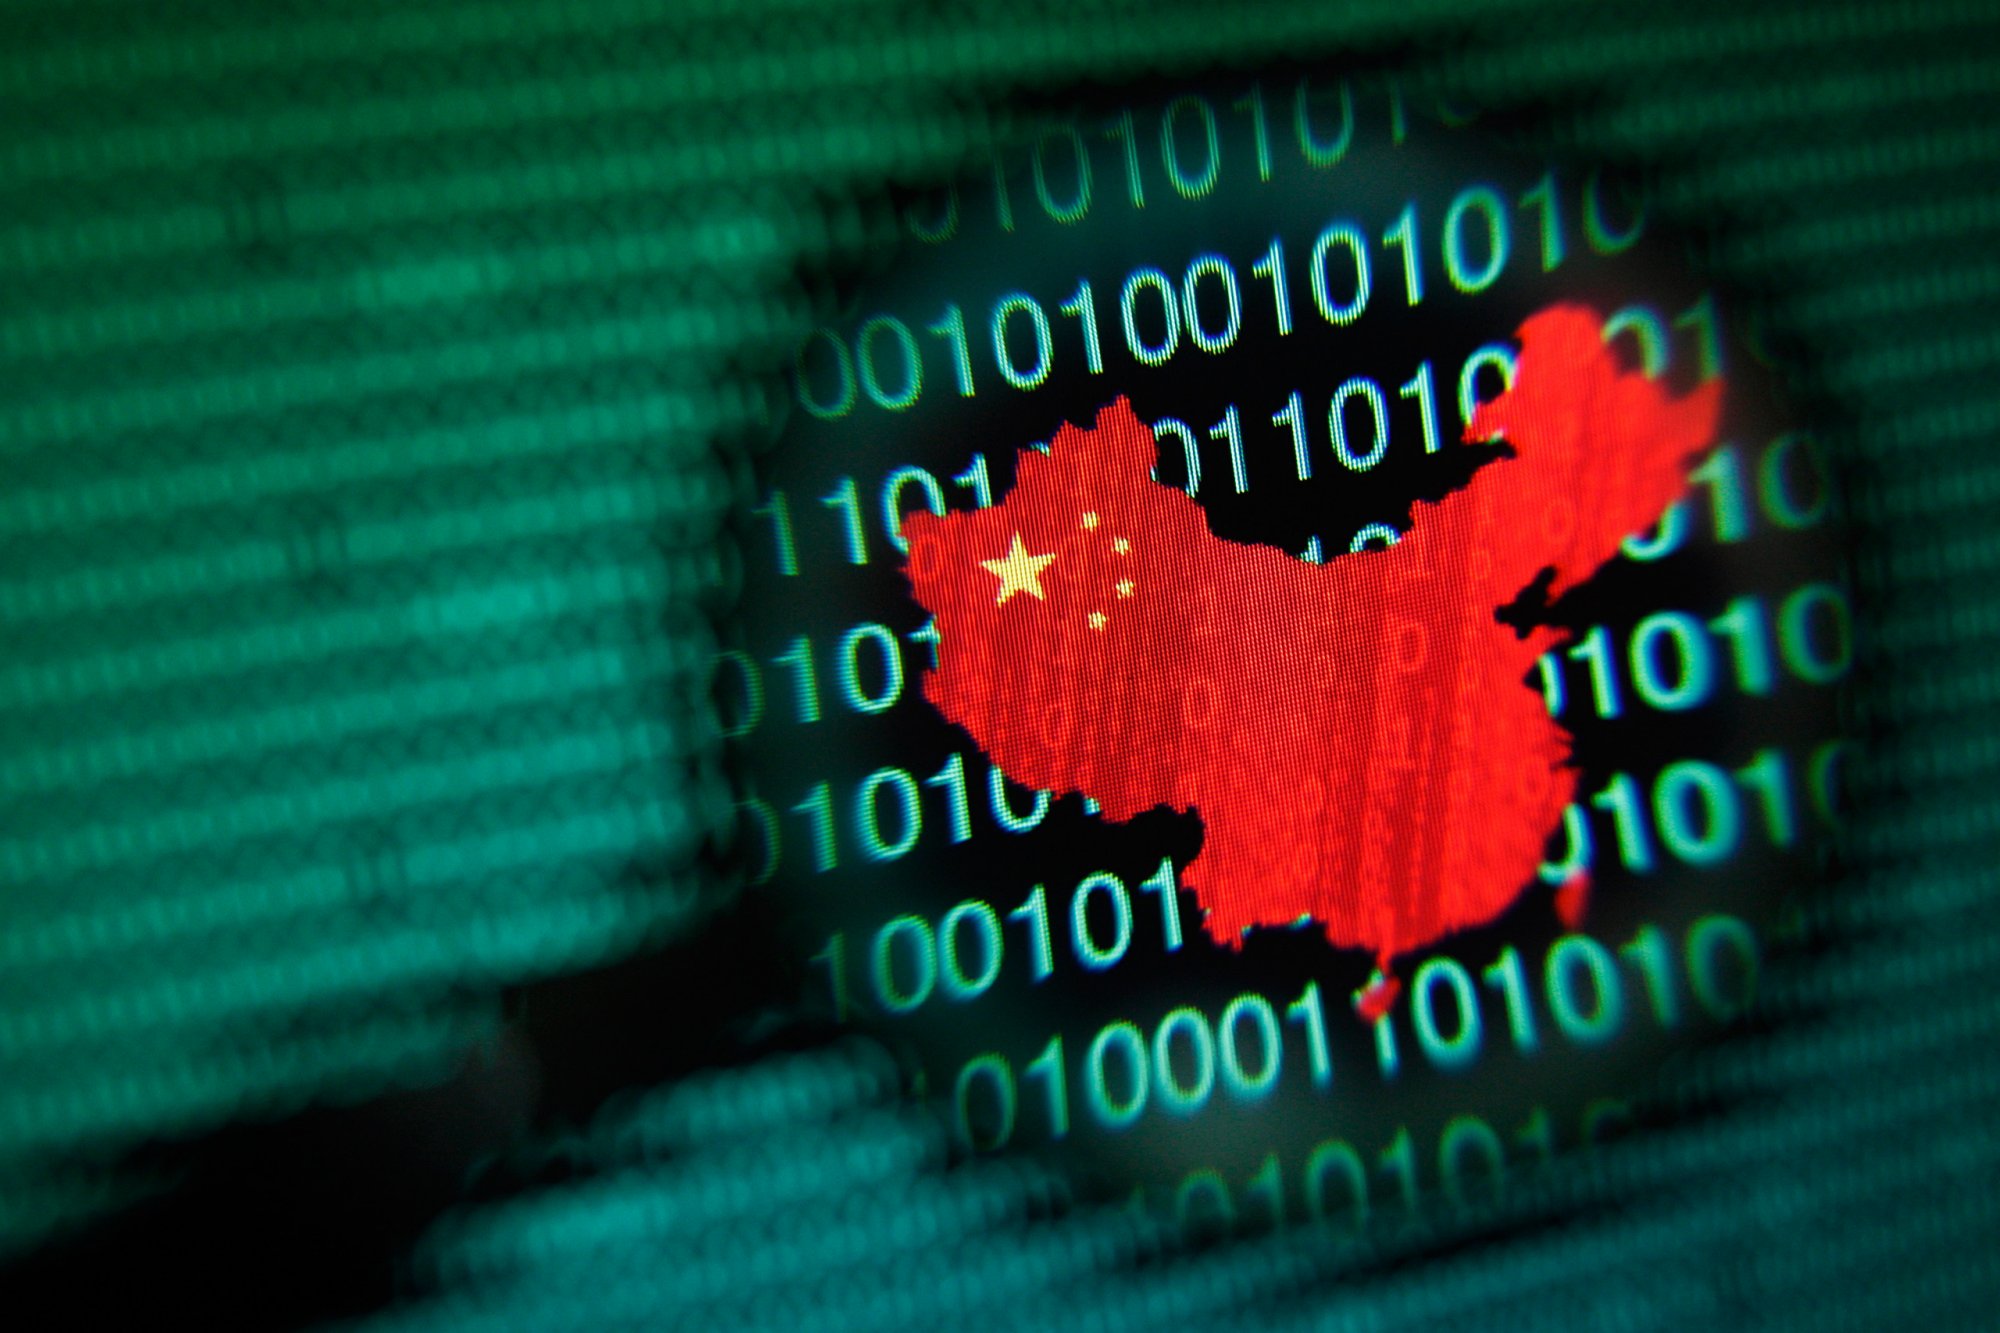 Image: China hacking and penetration of critical U.S. infrastructure systems worse than previous thought